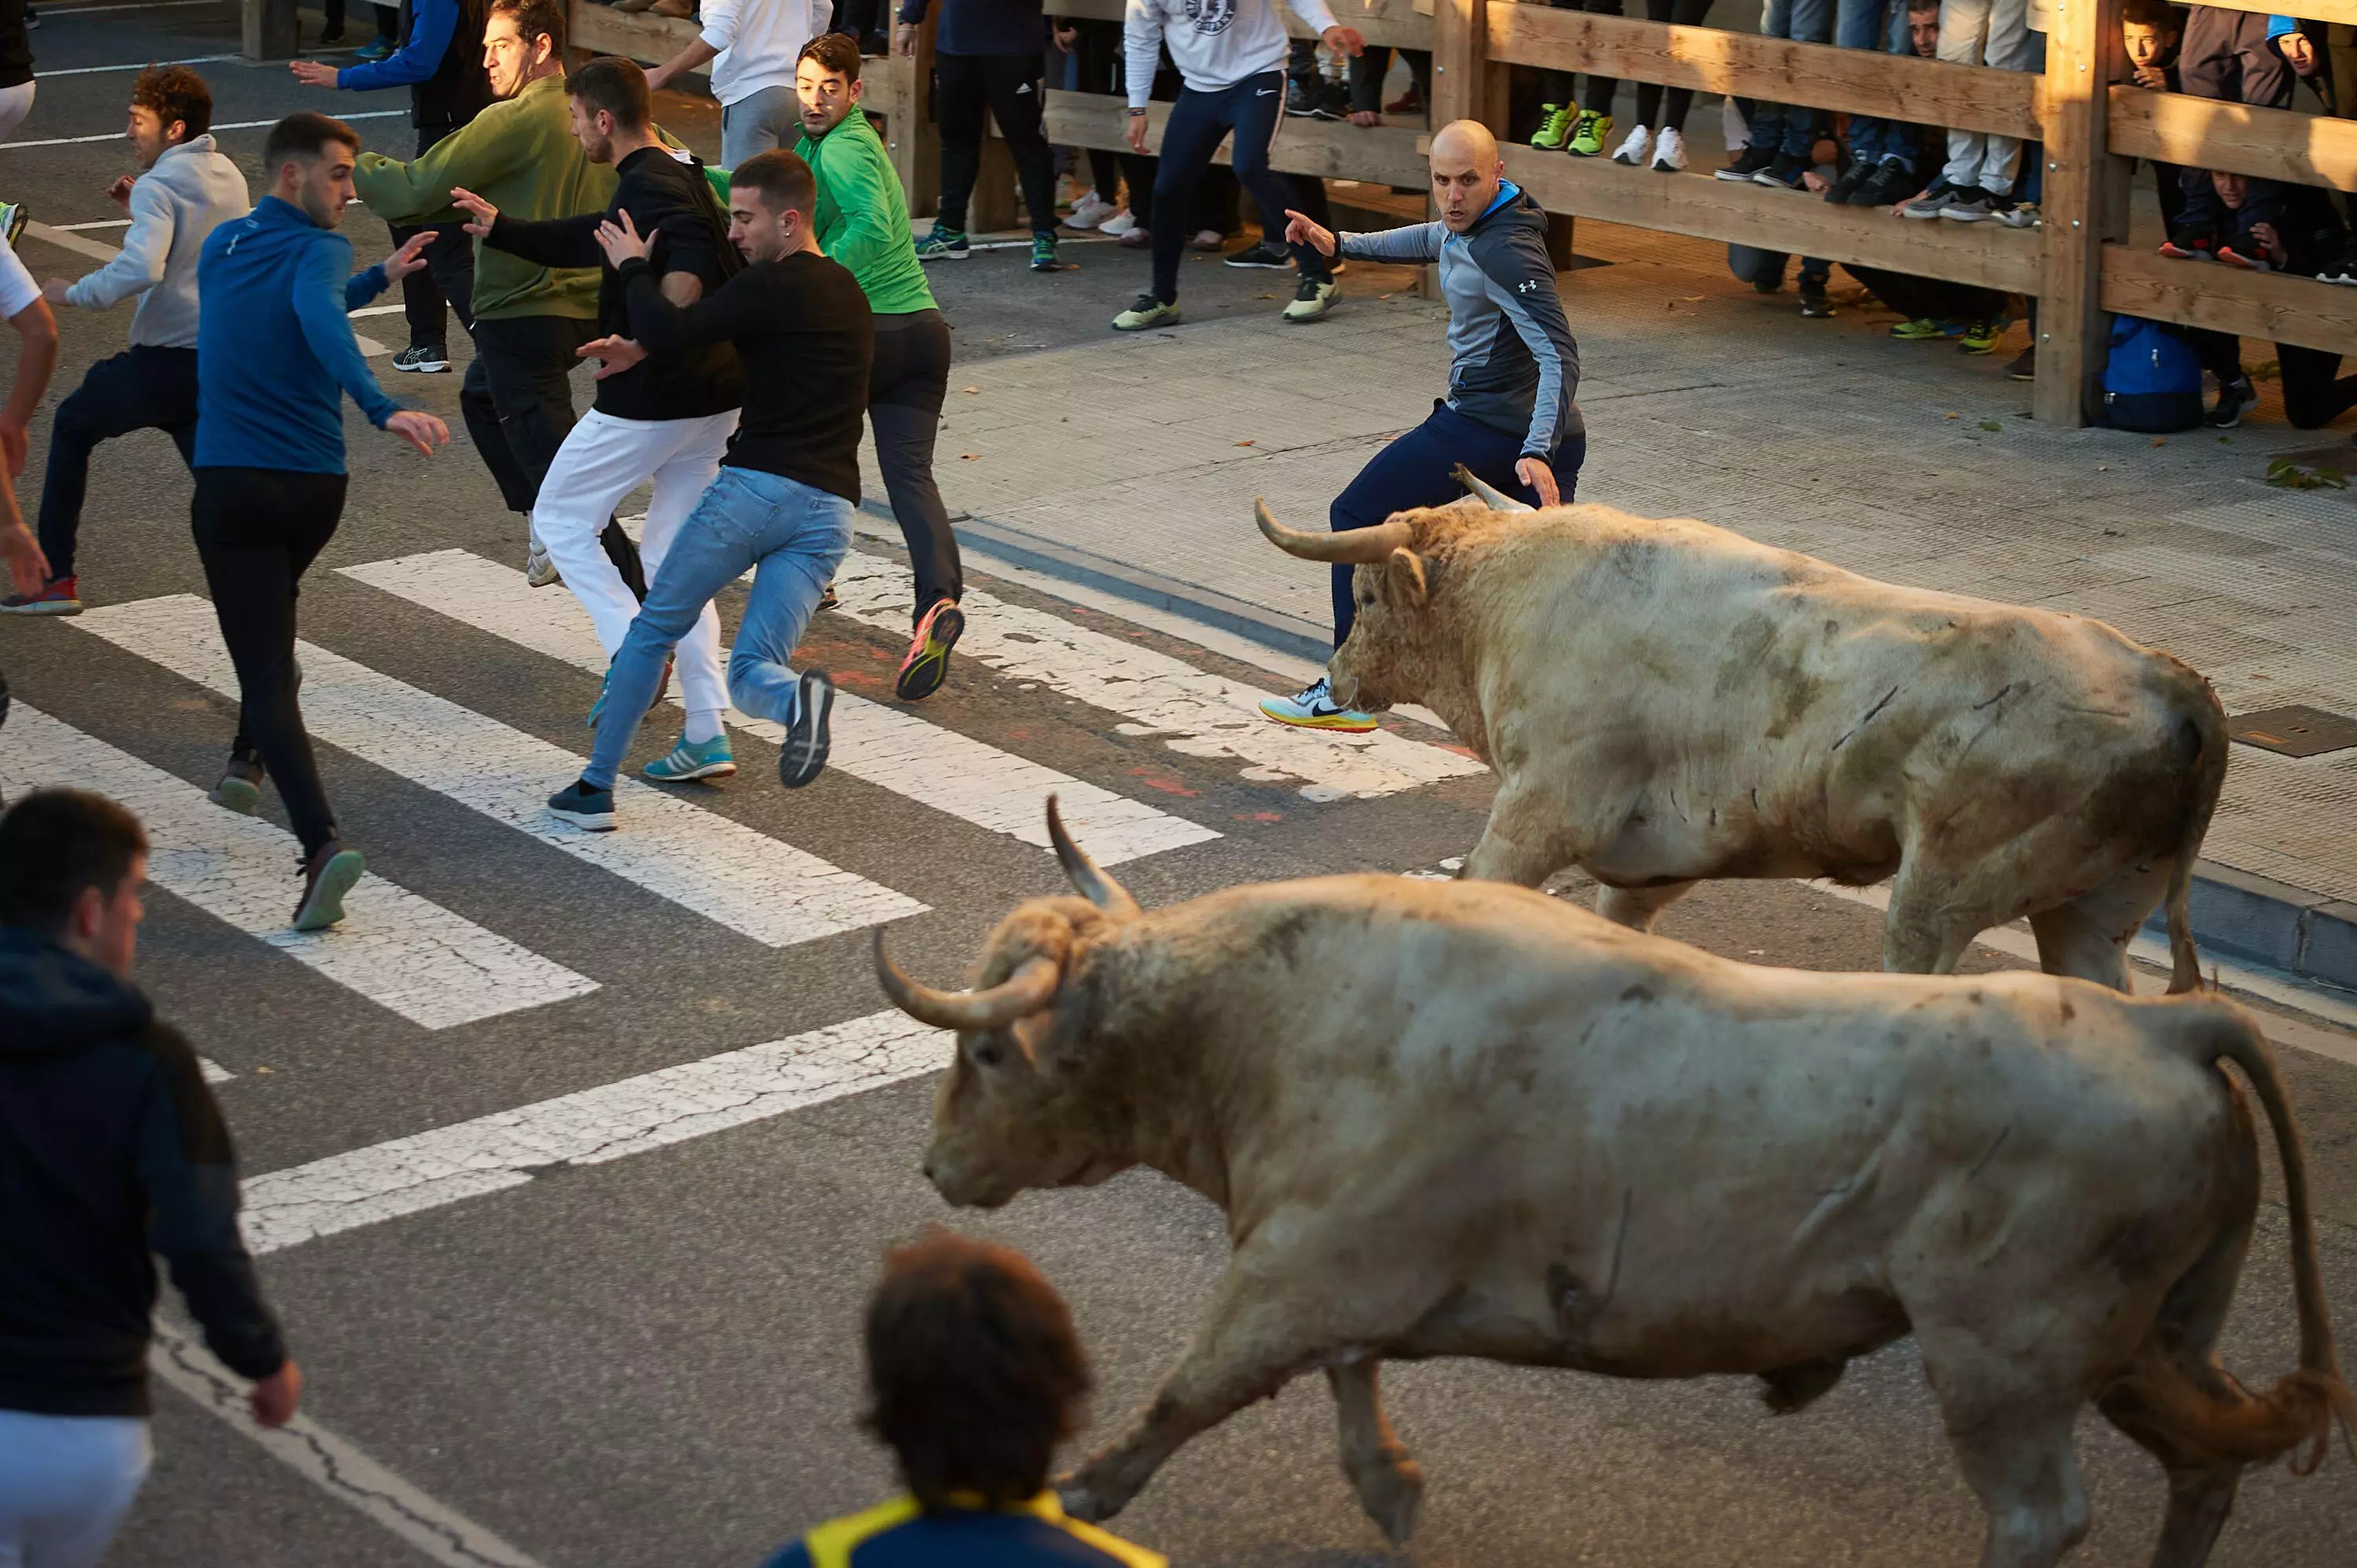 A bull running event earlier this month in Tafalla, central Navarra.